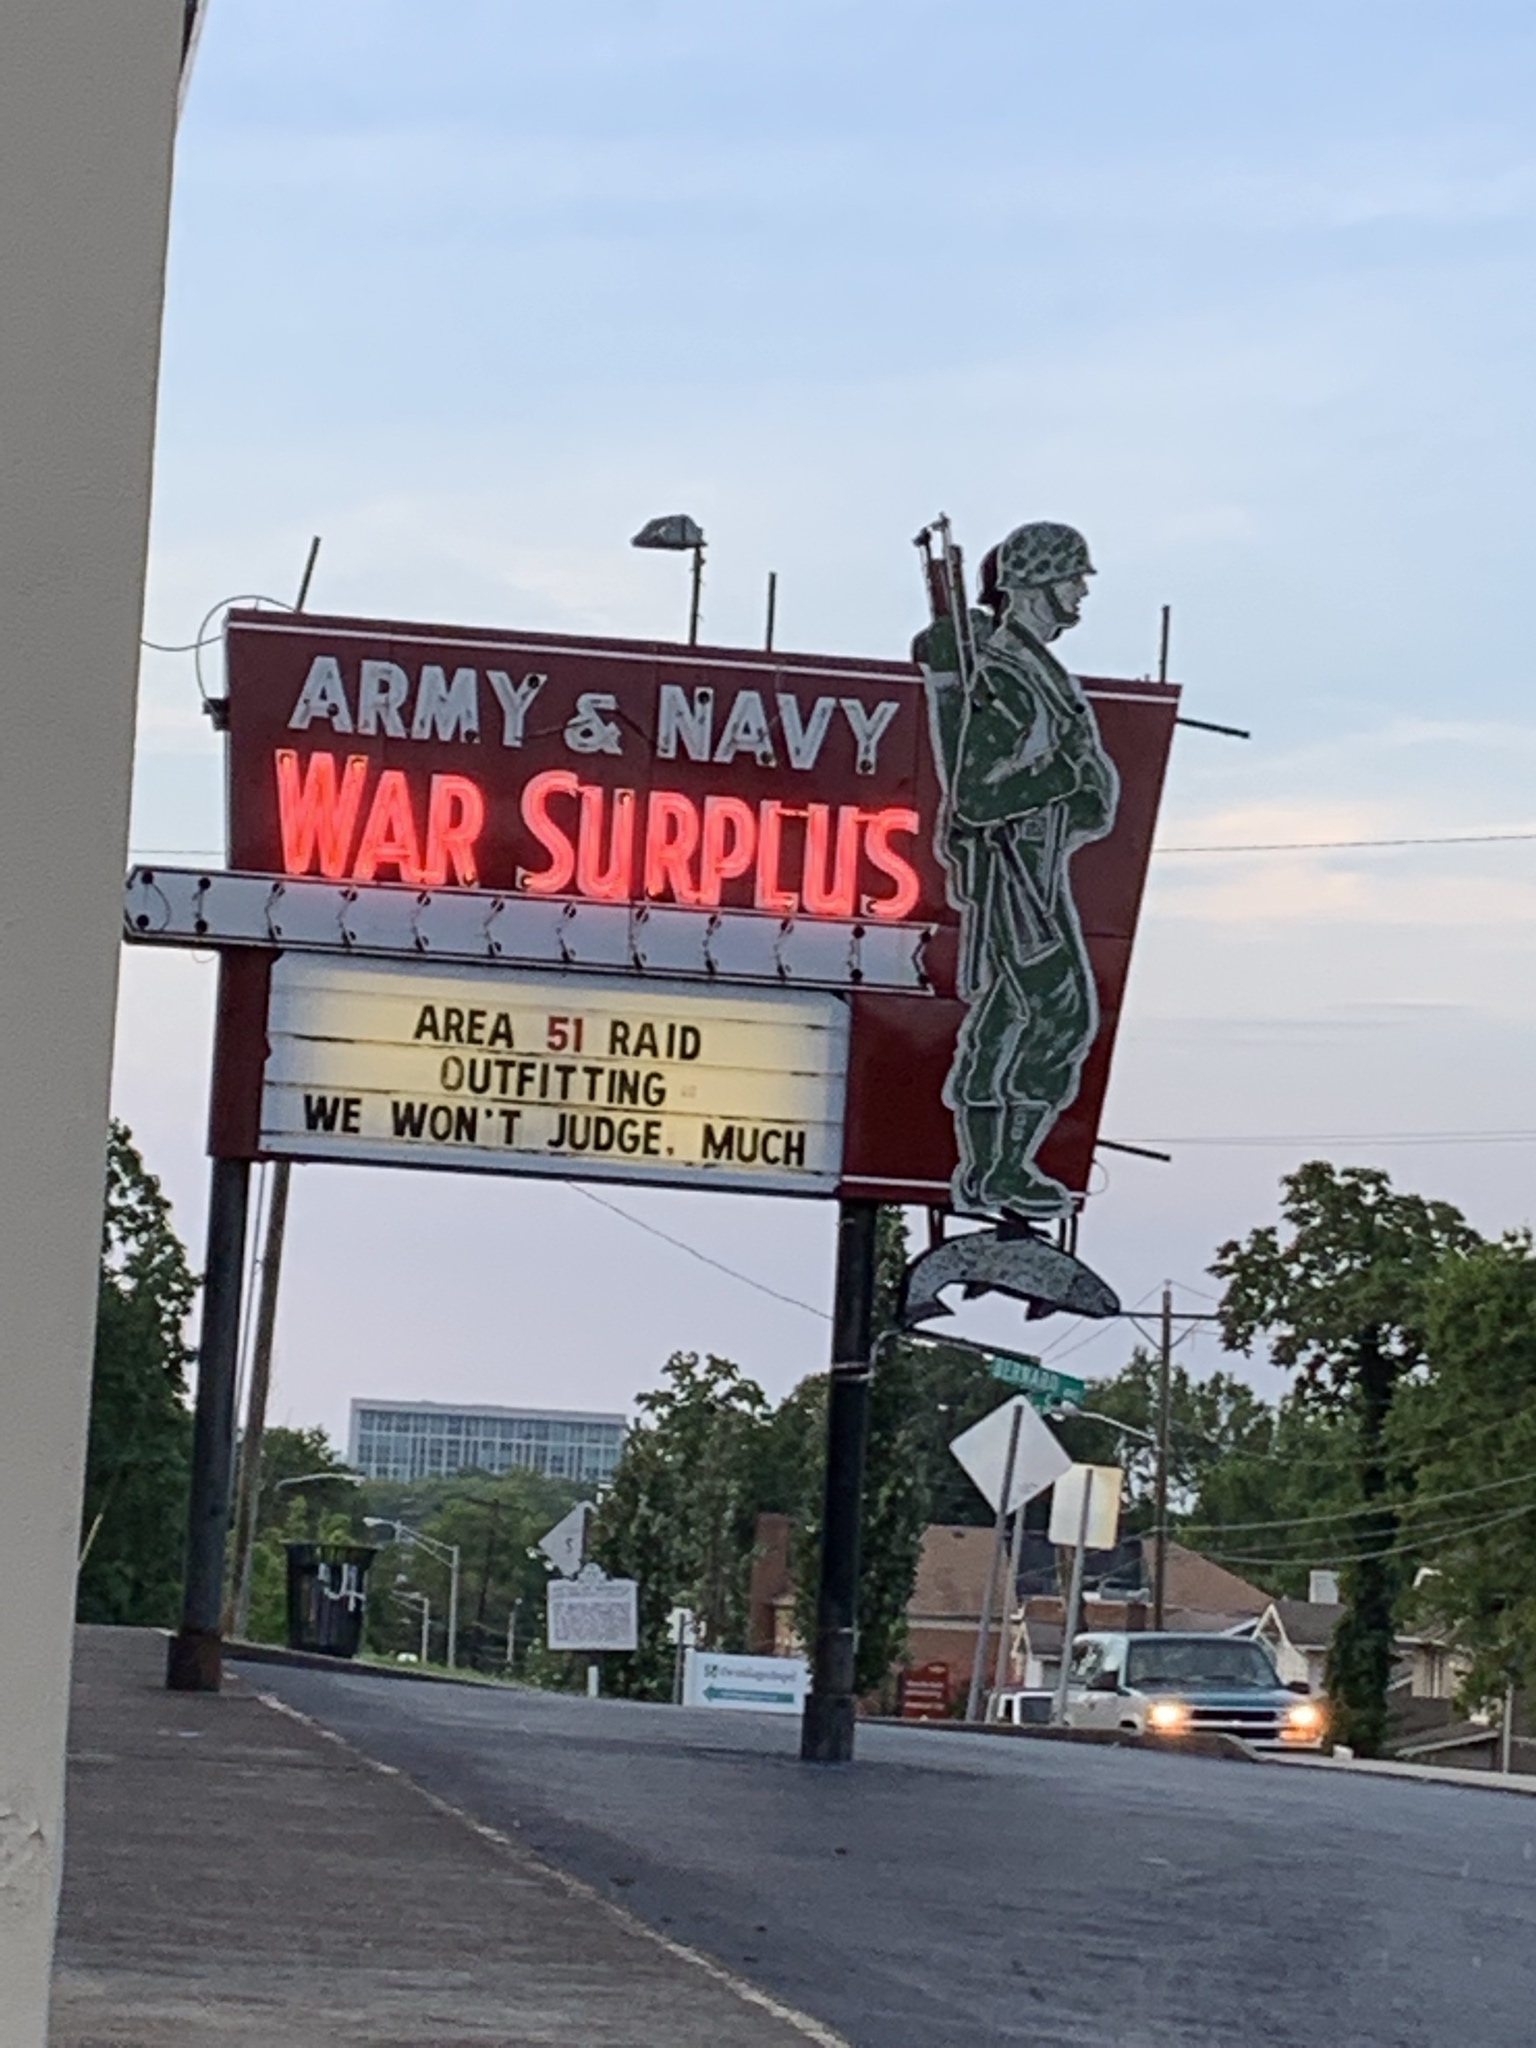 star wars area 51 gif - Army & Navy War Surplus Area 51 Raid Outfitting We Won'T Judge. Much 23